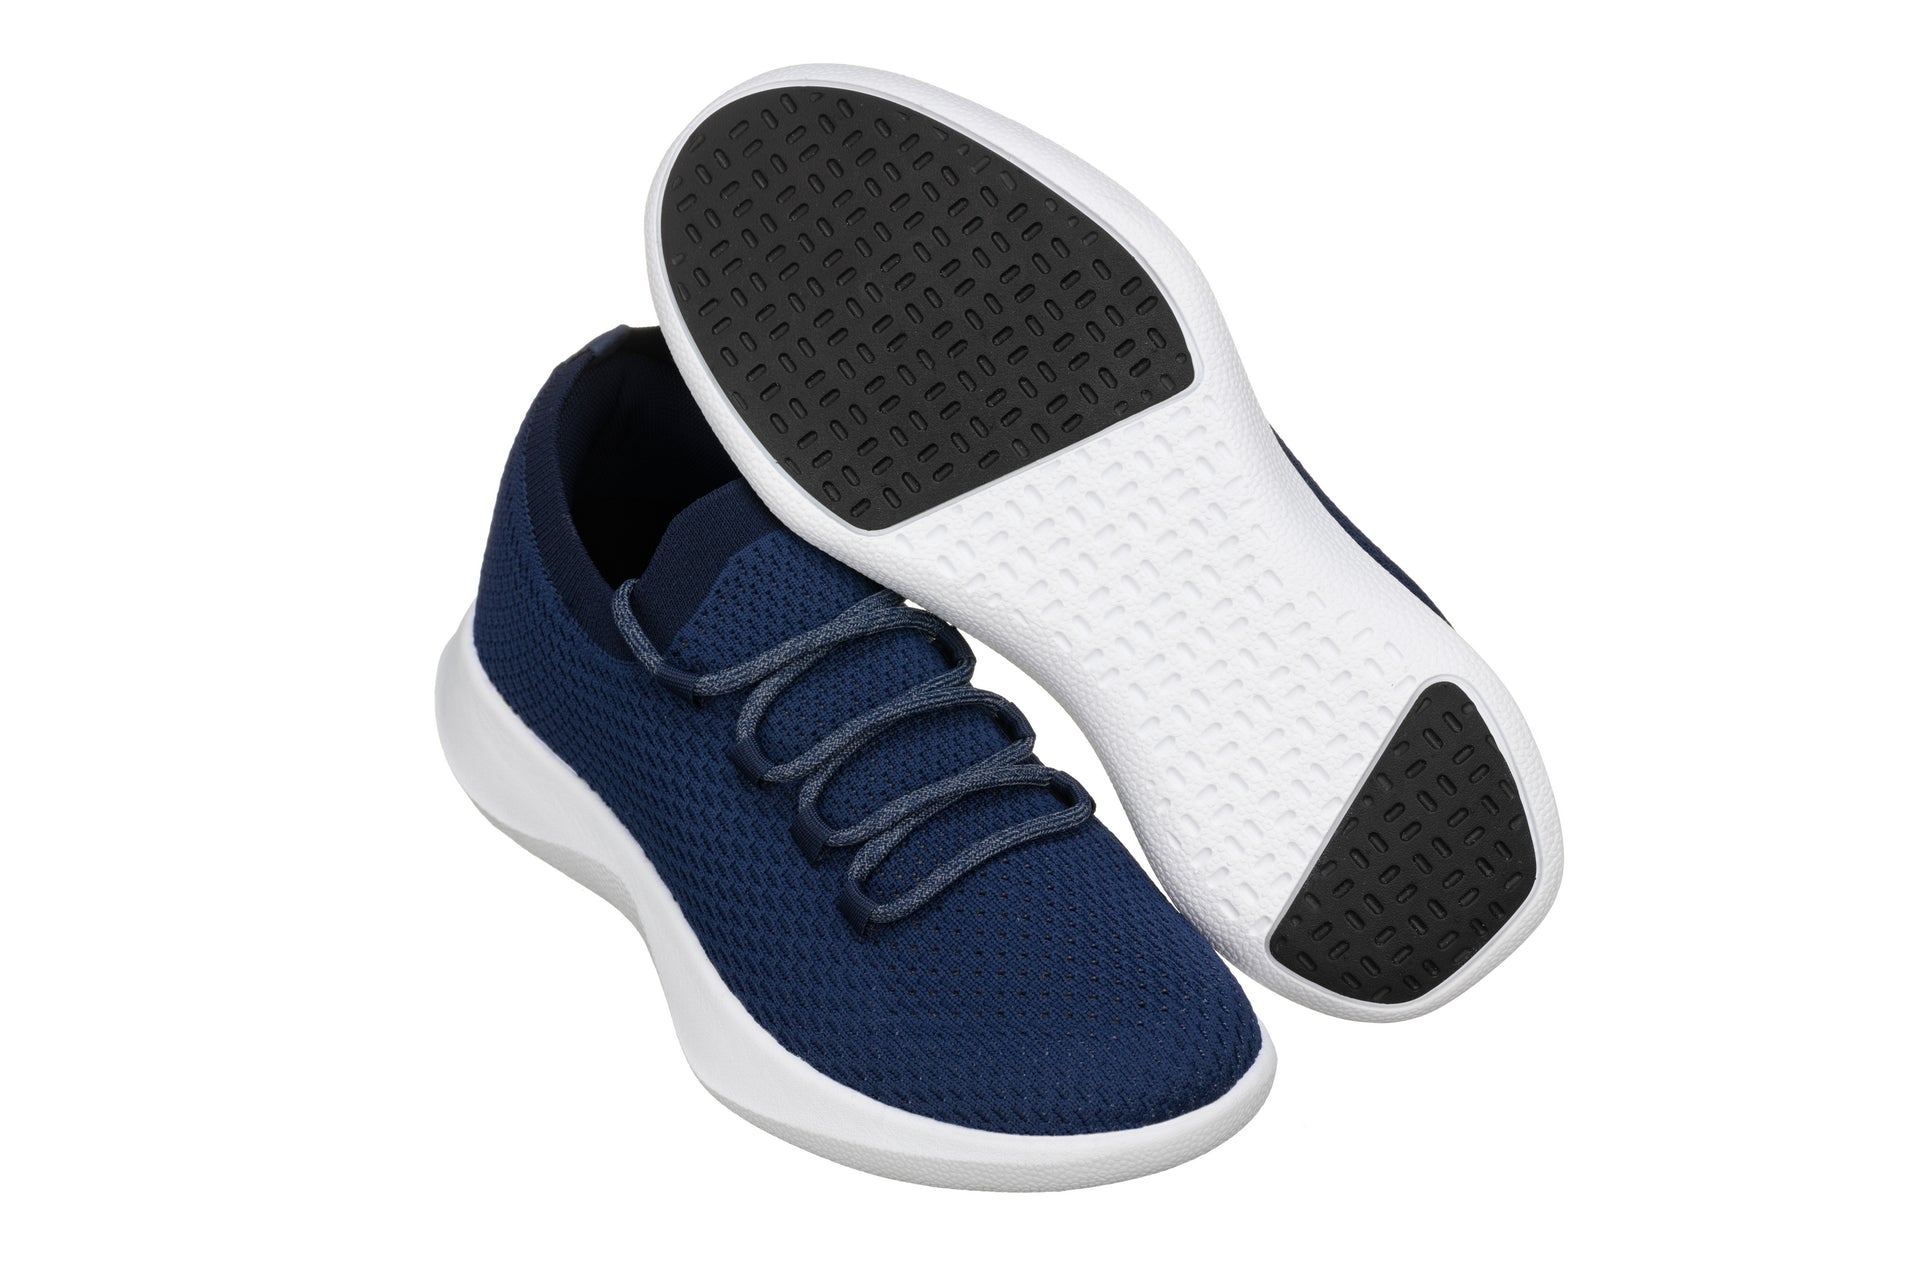 Elevator shoes height increase CALTO - Q084 - 2.4 Inches Taller (Blue/Grey) - Ultra Lightweight Sneakers